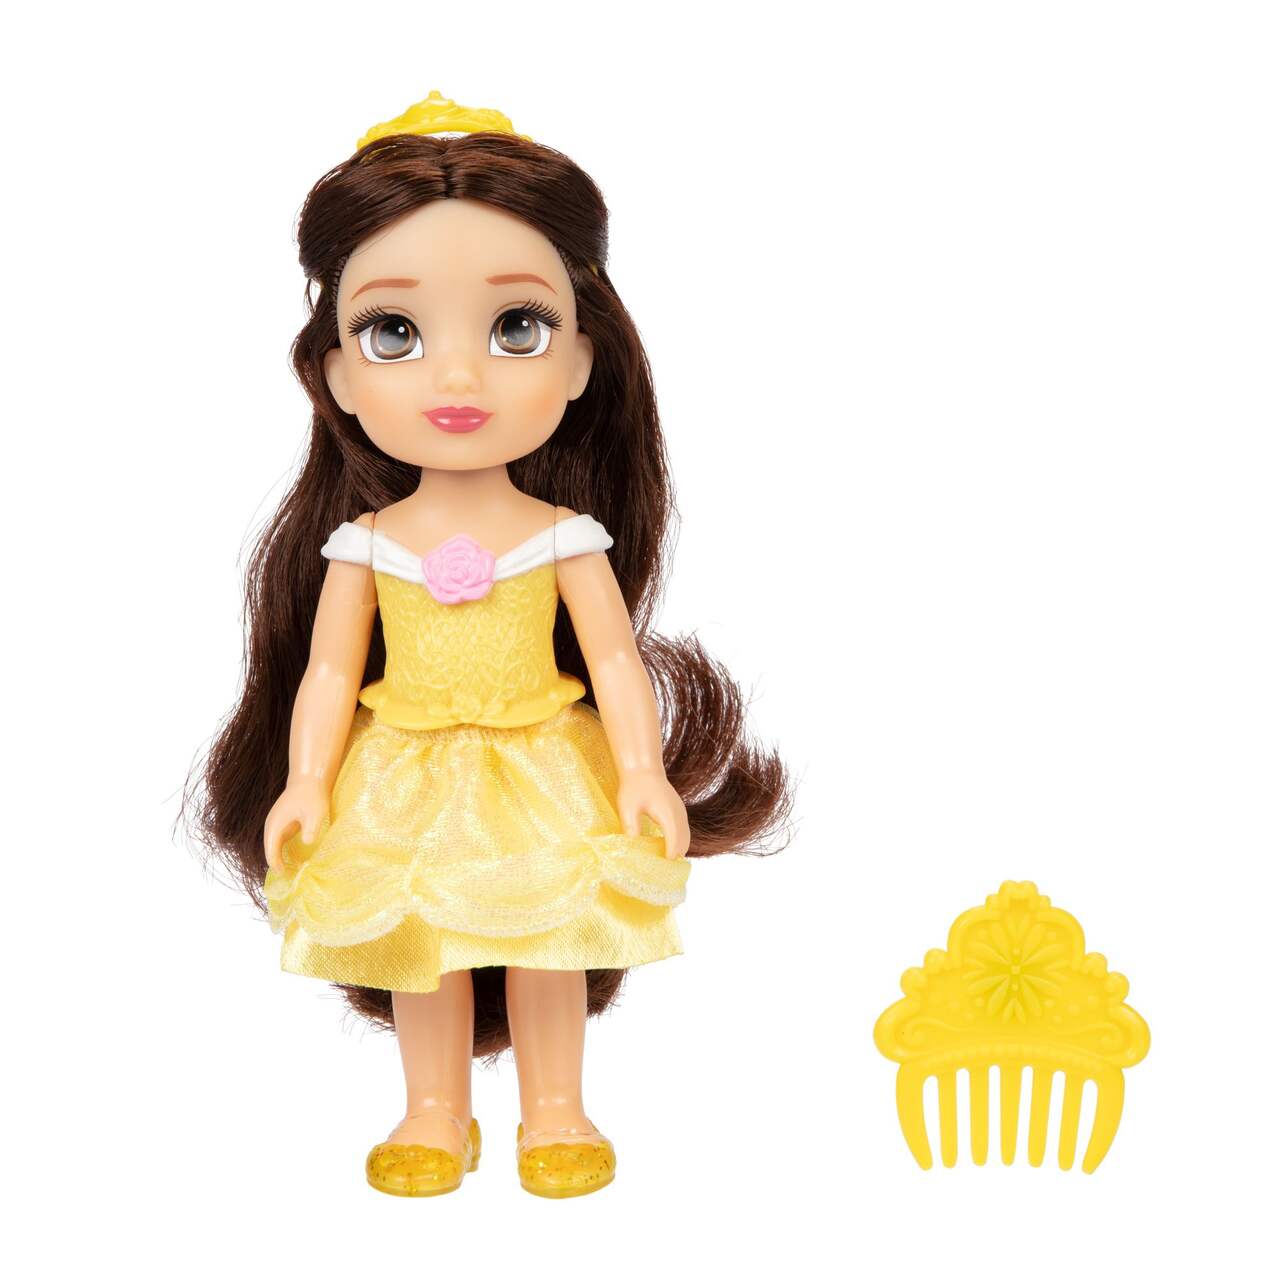 Disney Princess Petite 6-in Dolls, Assorted Styles, Ages 3+